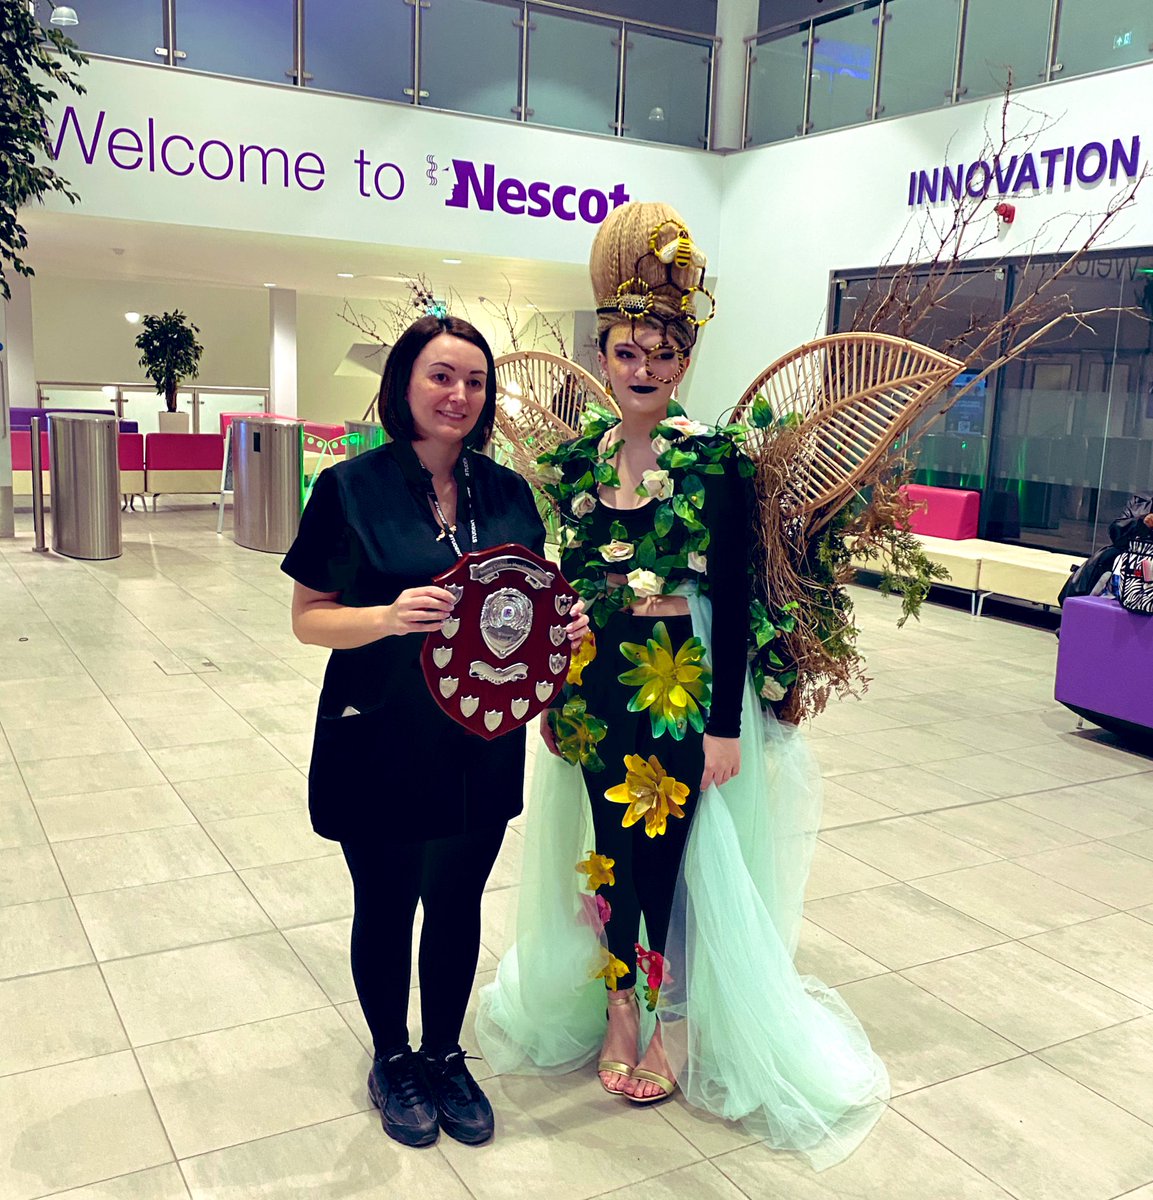 We hosted a Surrey Colleges’ hairdressing competition today with around 50 amazing students from Nescot, @Activate_Learn, @FEBrooklands and @EastSurreyColl. Amazing work on show including the Level 3 winner, our very own Zoe